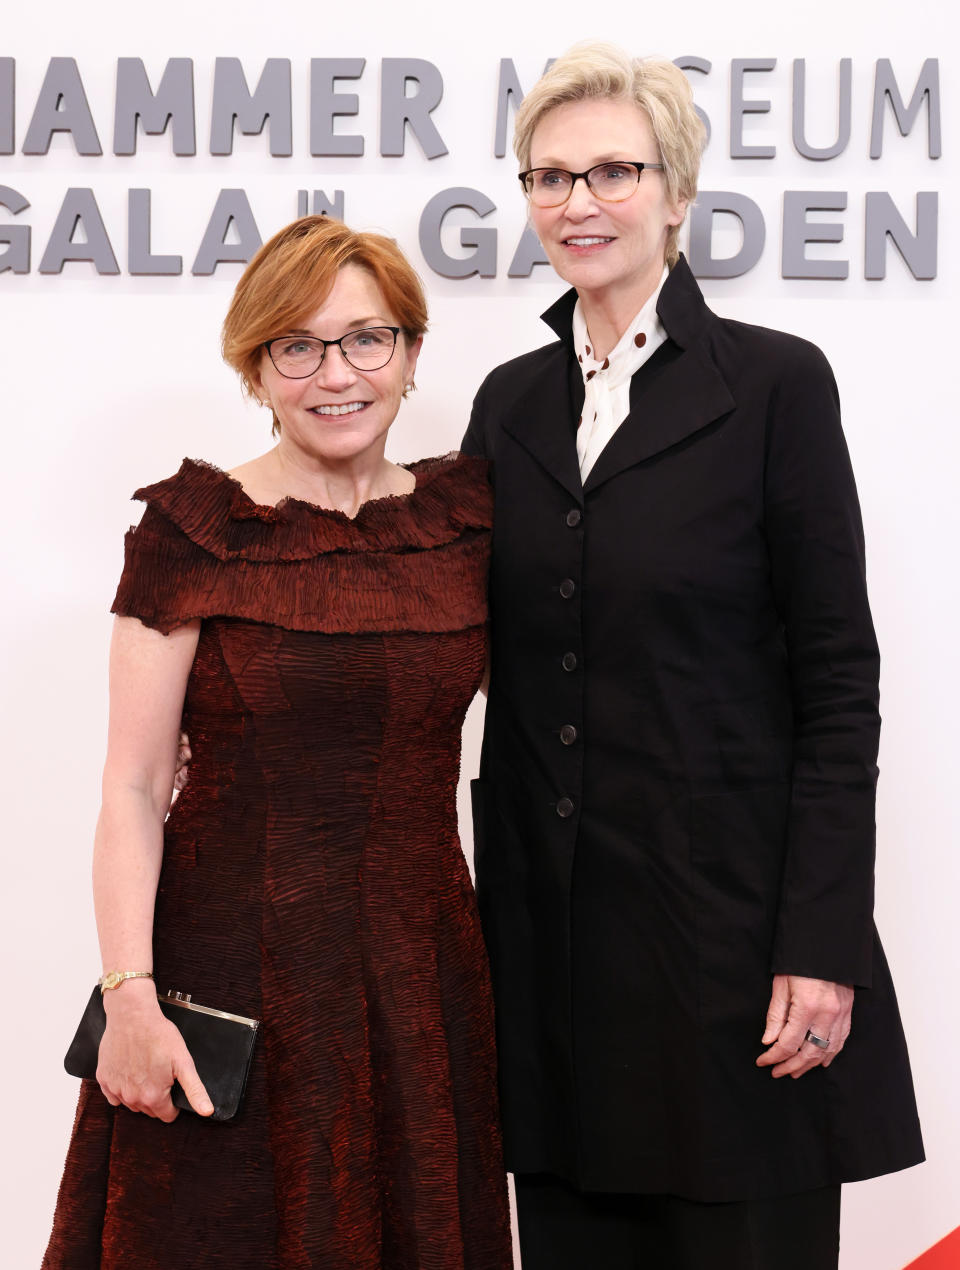 Jennifer Cheyne and Jane Lynch at the Hammer Museum Gala in the Garden, posing together. Jane Wagner is wearing a textured, knee-length dress, and Jane Lynch is in a black pantsuit with a white shirt